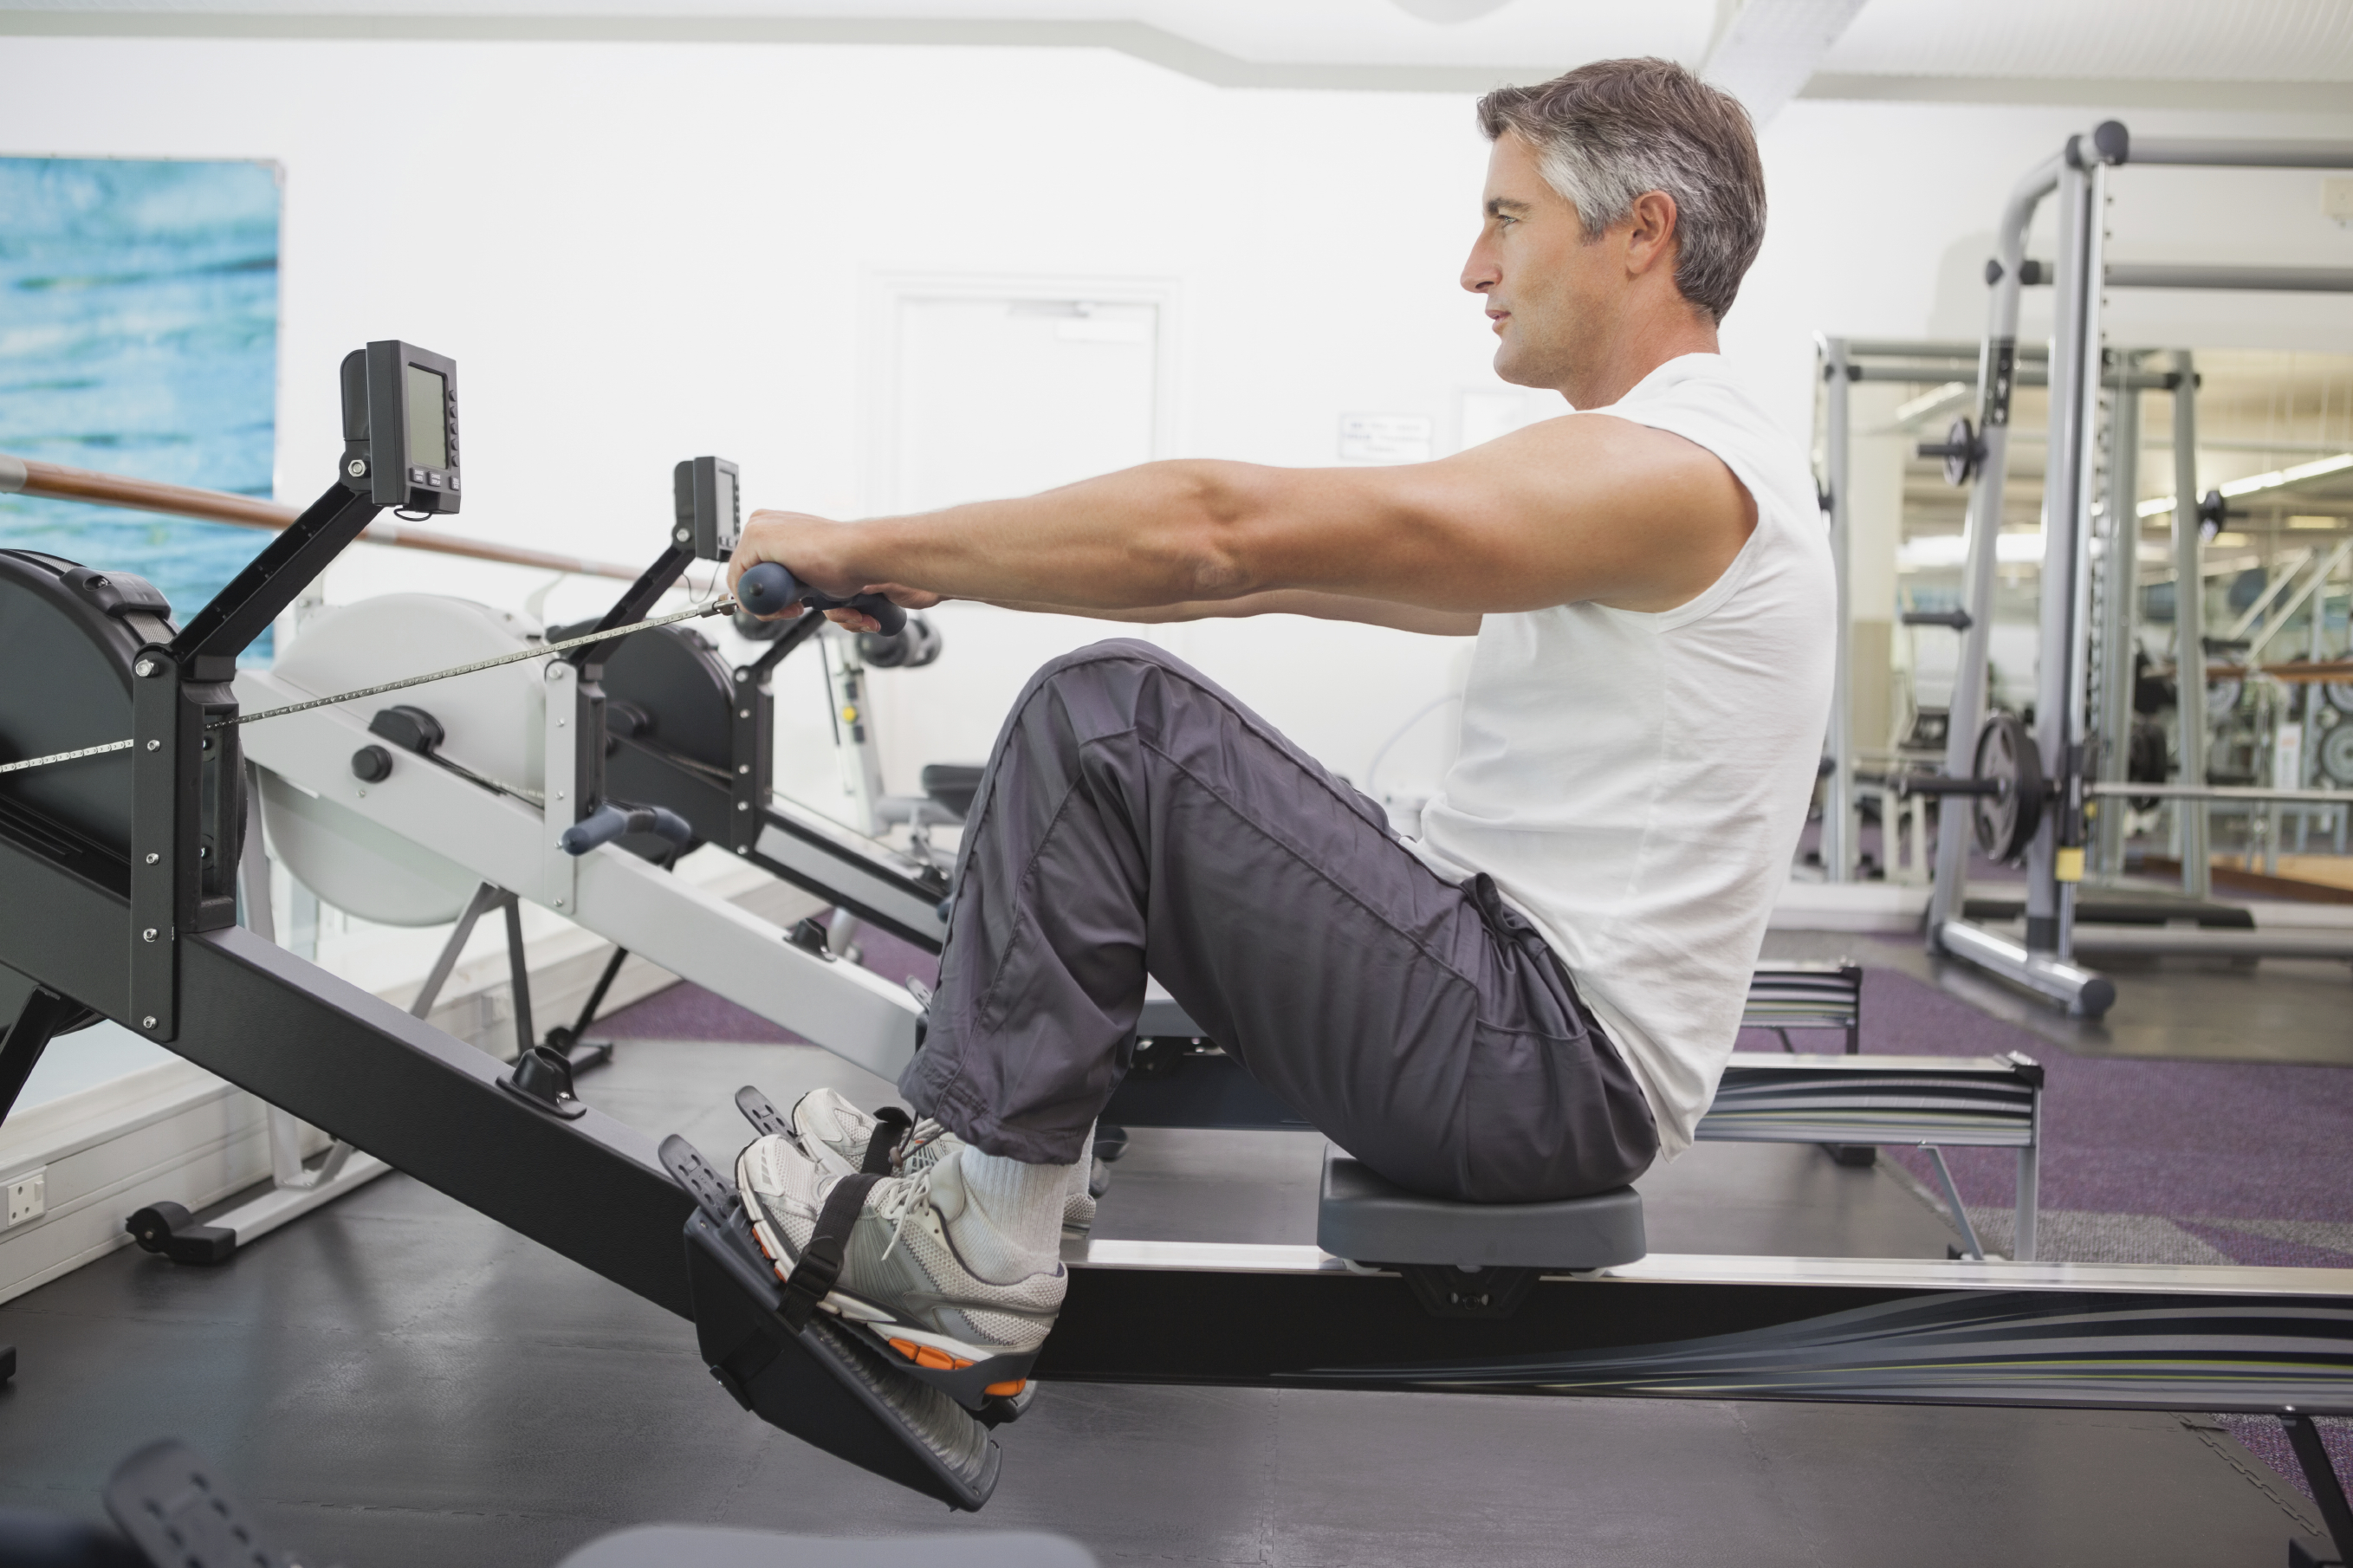 How To Use Life Fitness Equipment
